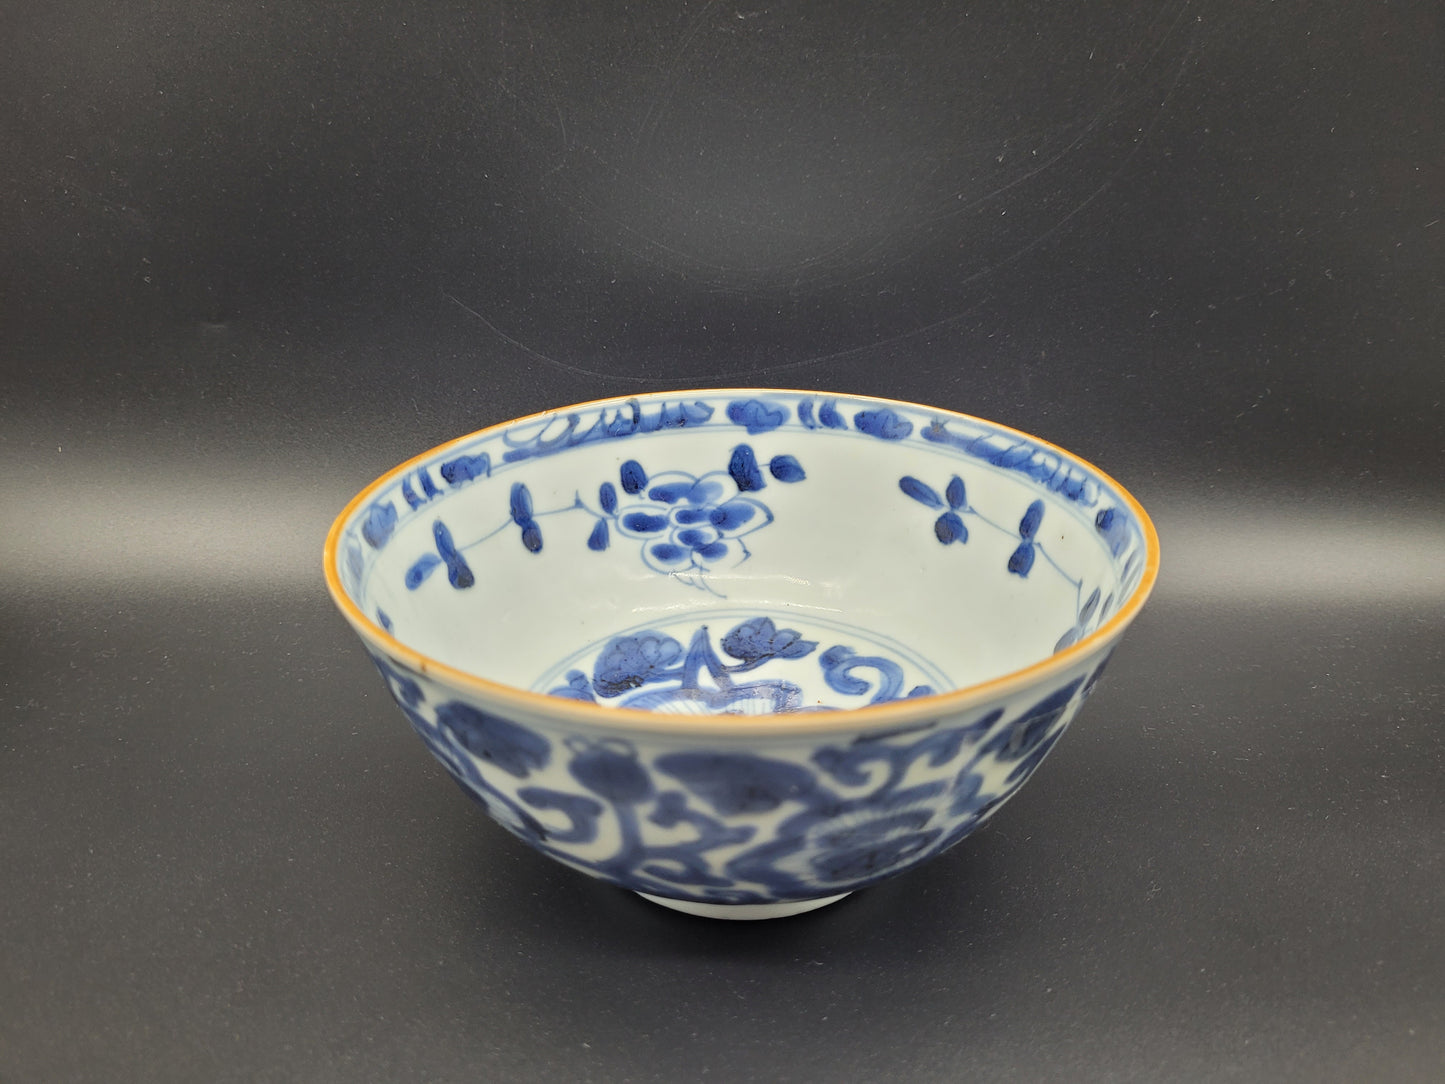 Antique Chinese Bowl Blue and White Porcelain Bowl Porcelain 18th Century